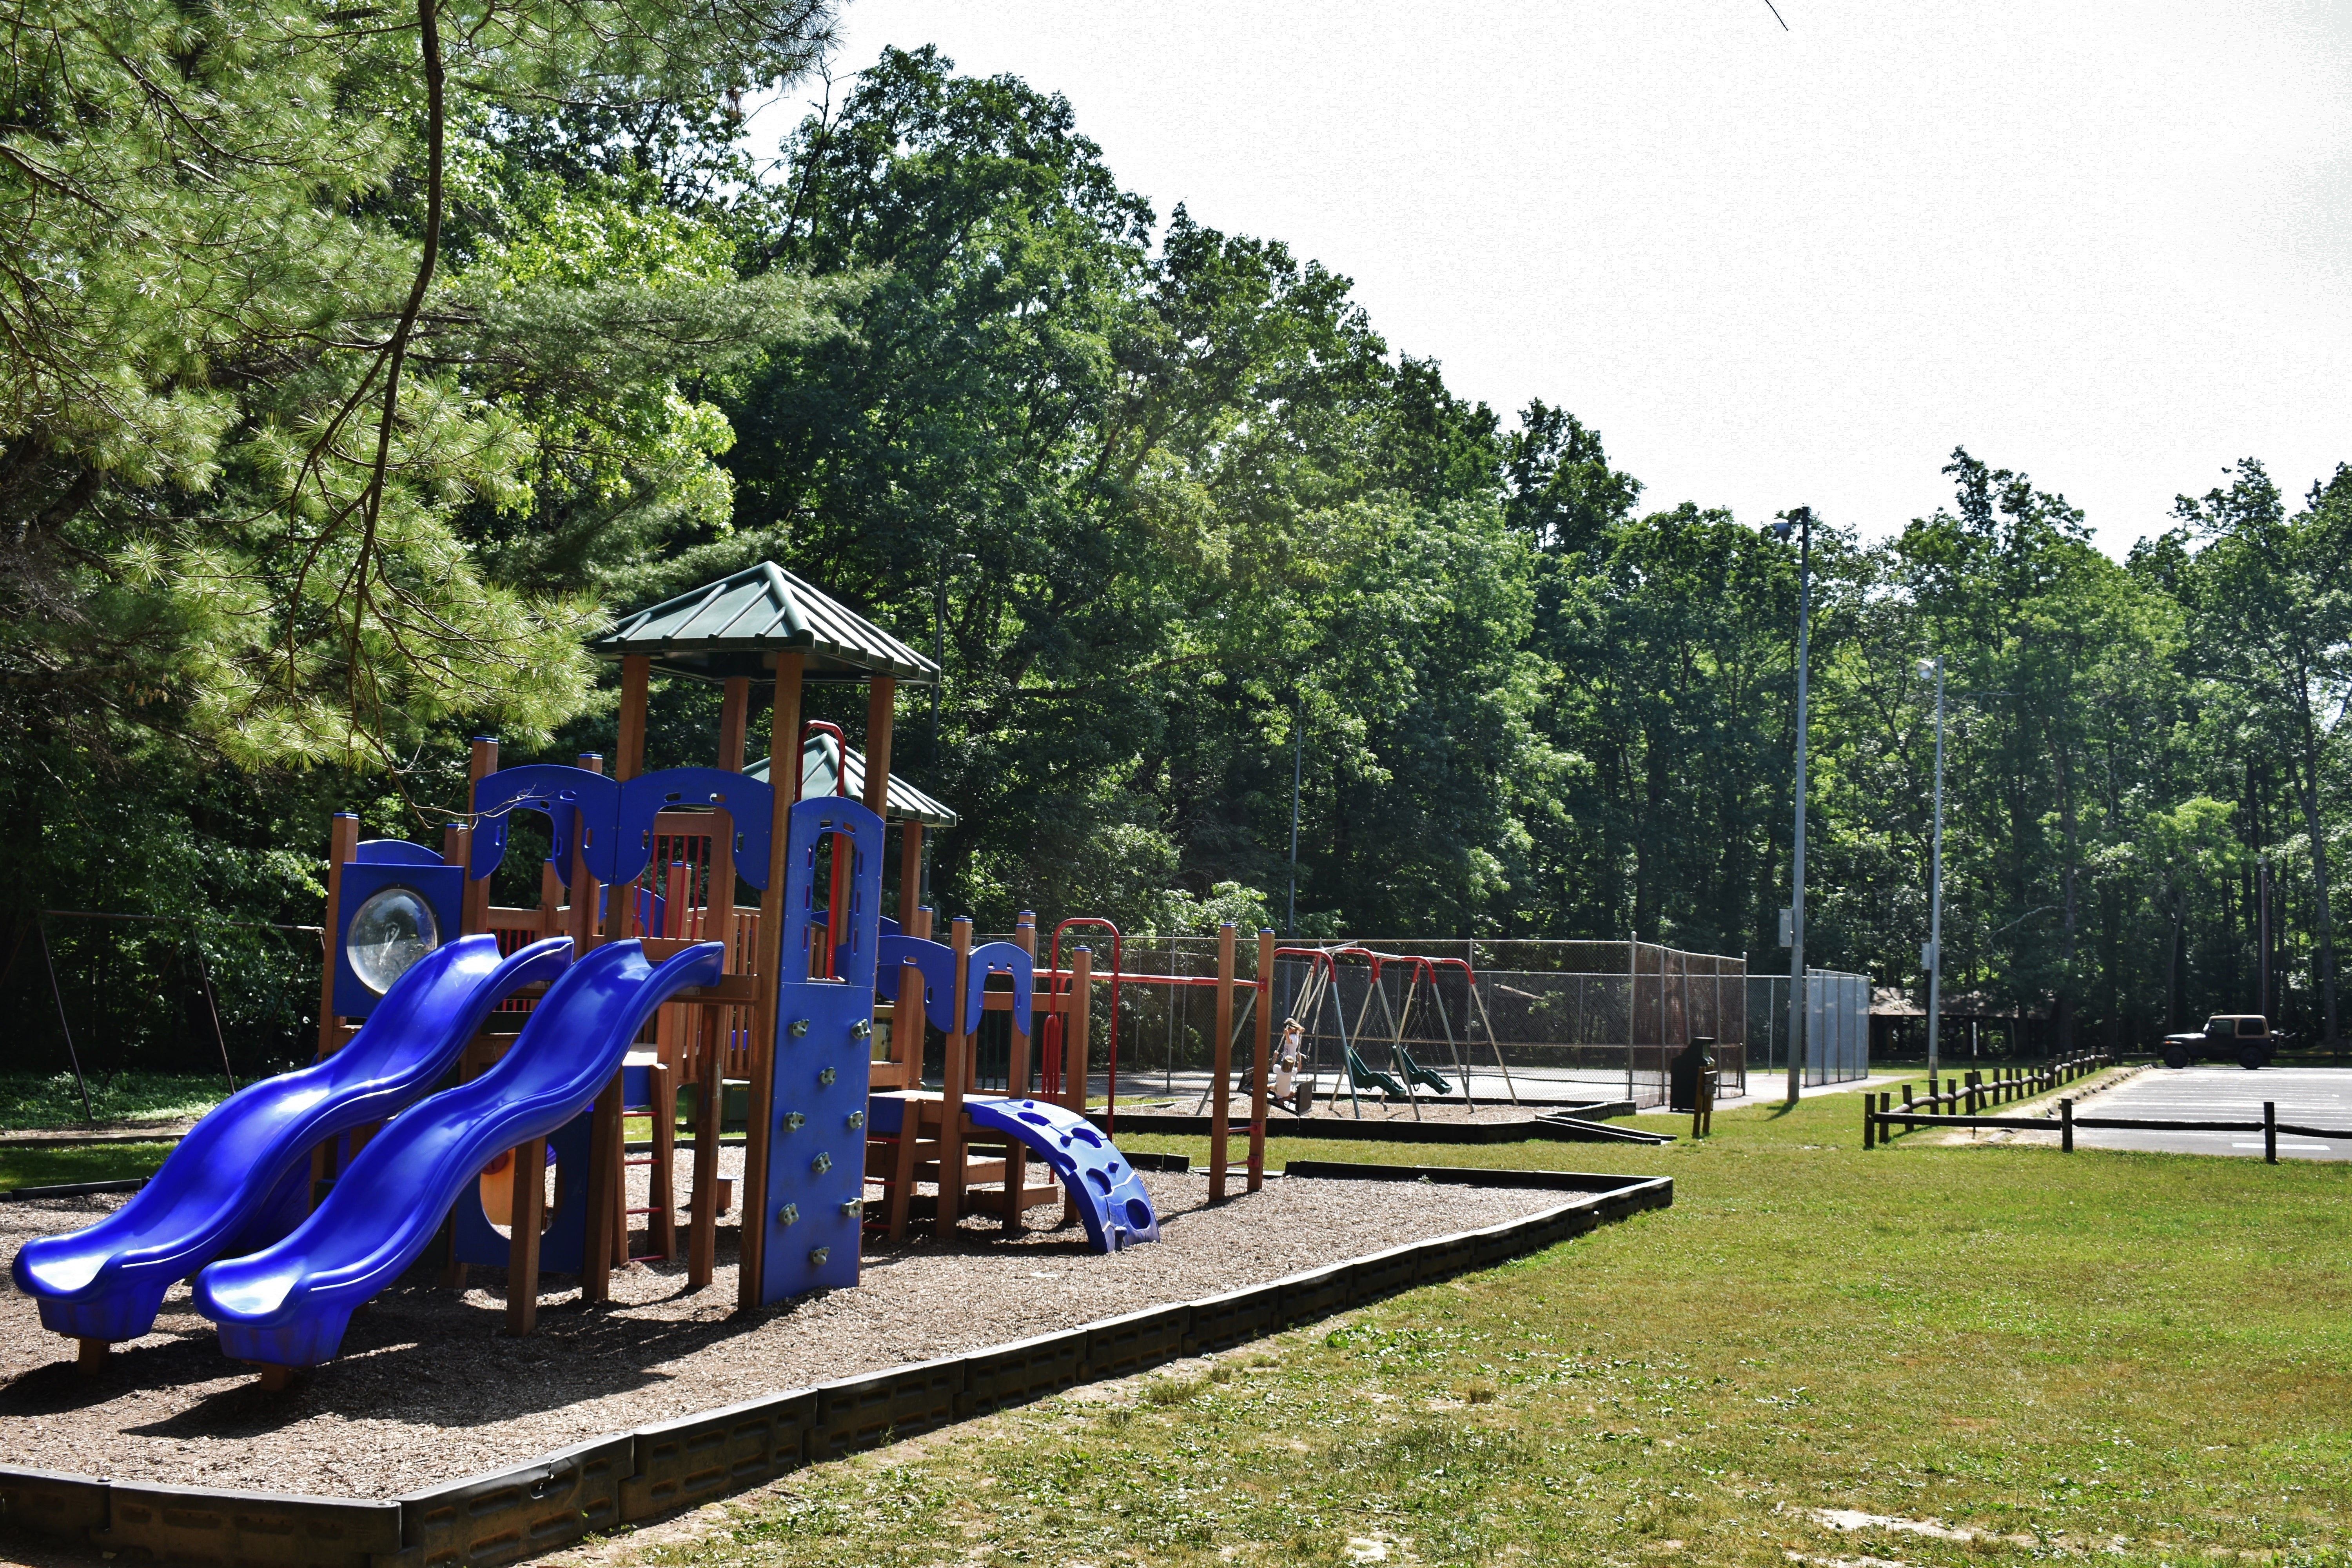 One area of the park has two play areas, tennis courts, and basketball.